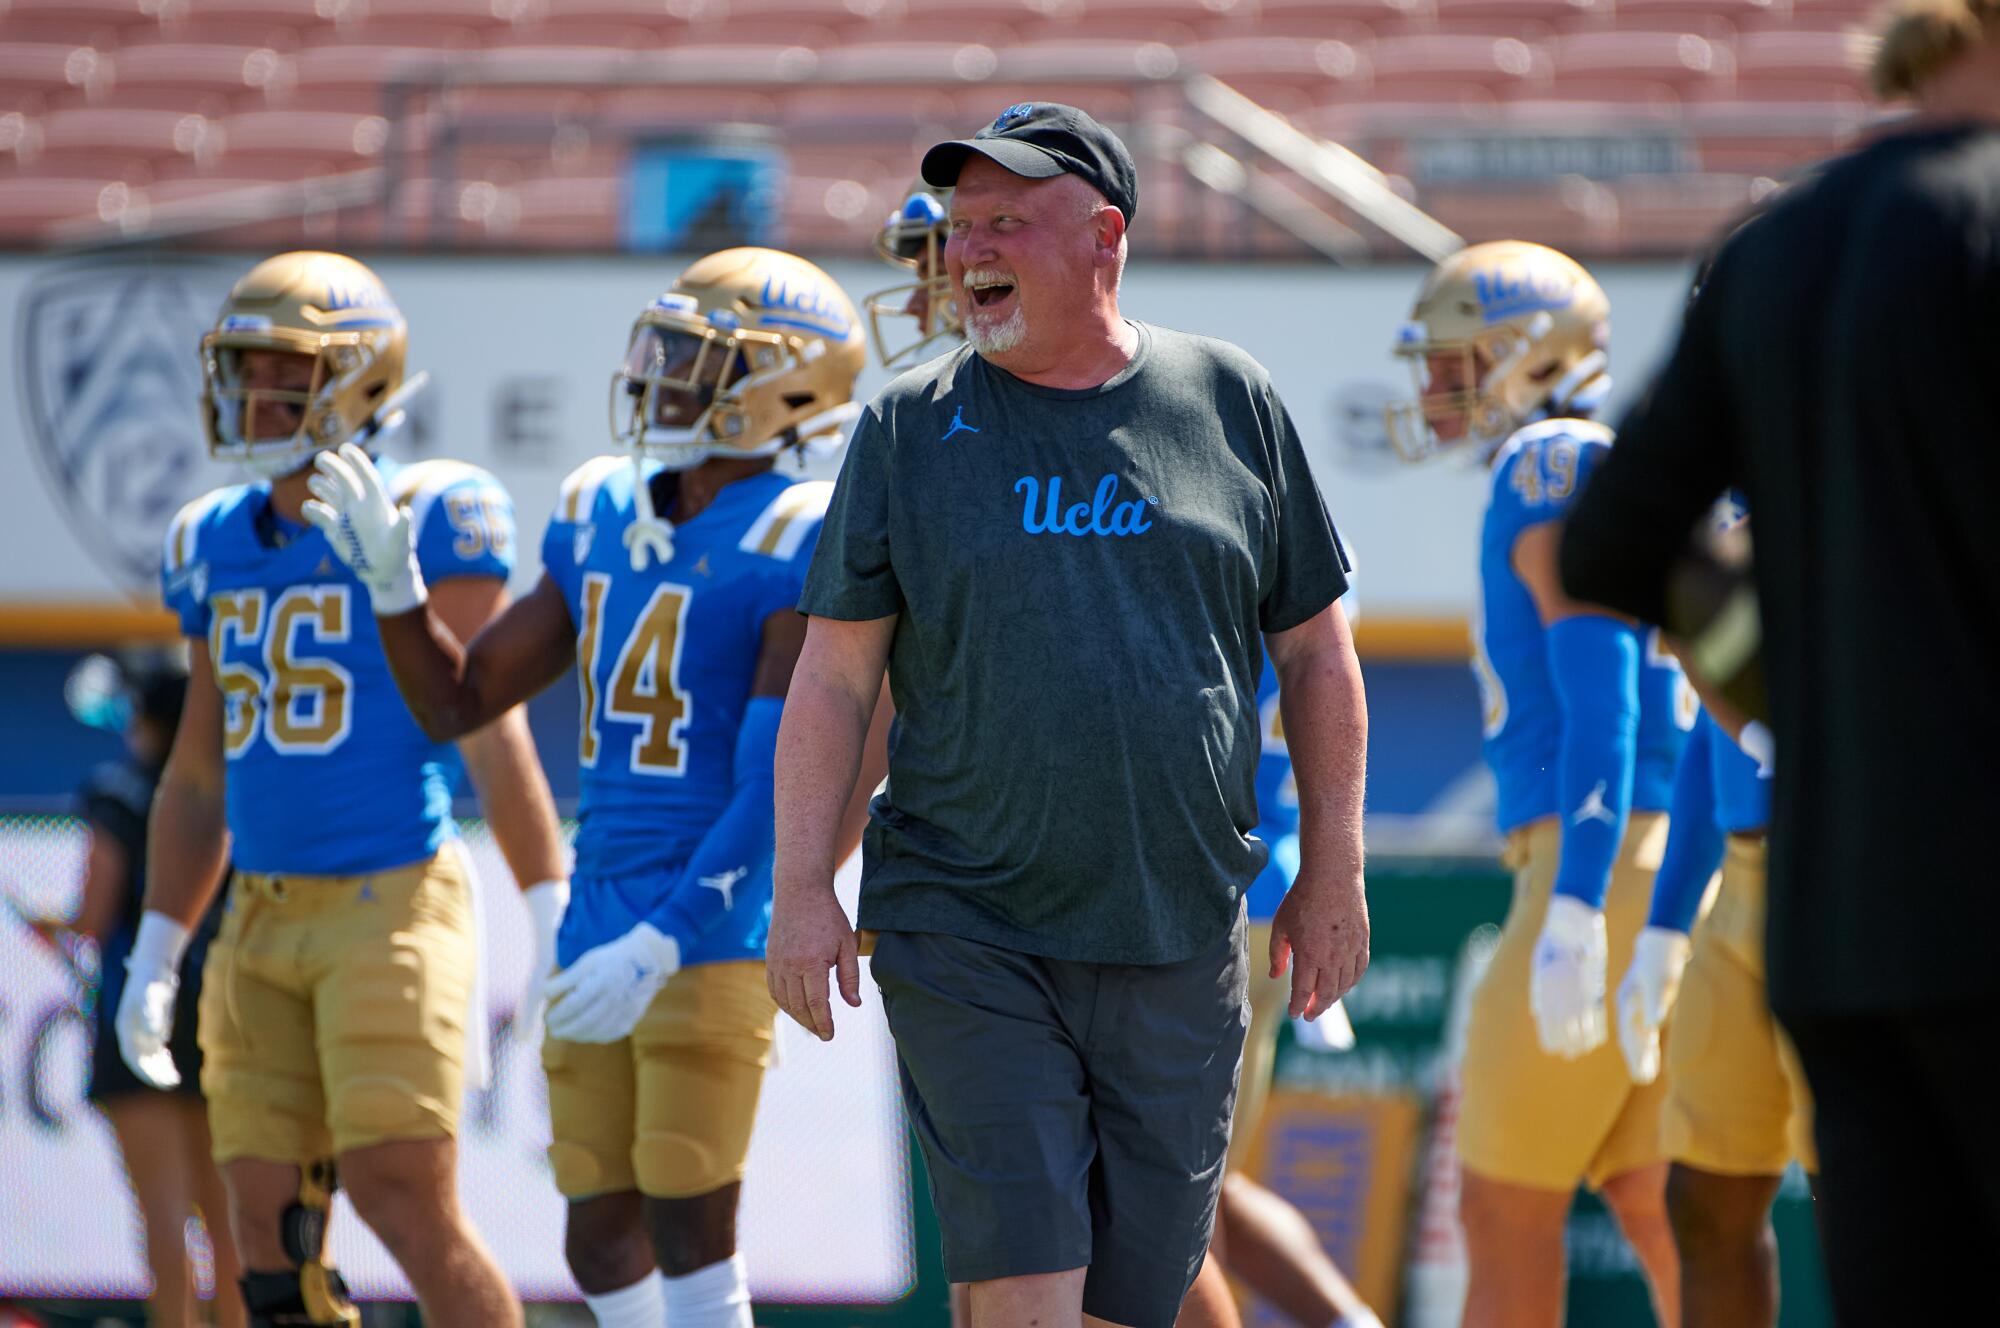 UCLA defensive coordinator Bill McGovern smiles on the field during a team practice session in 2022.